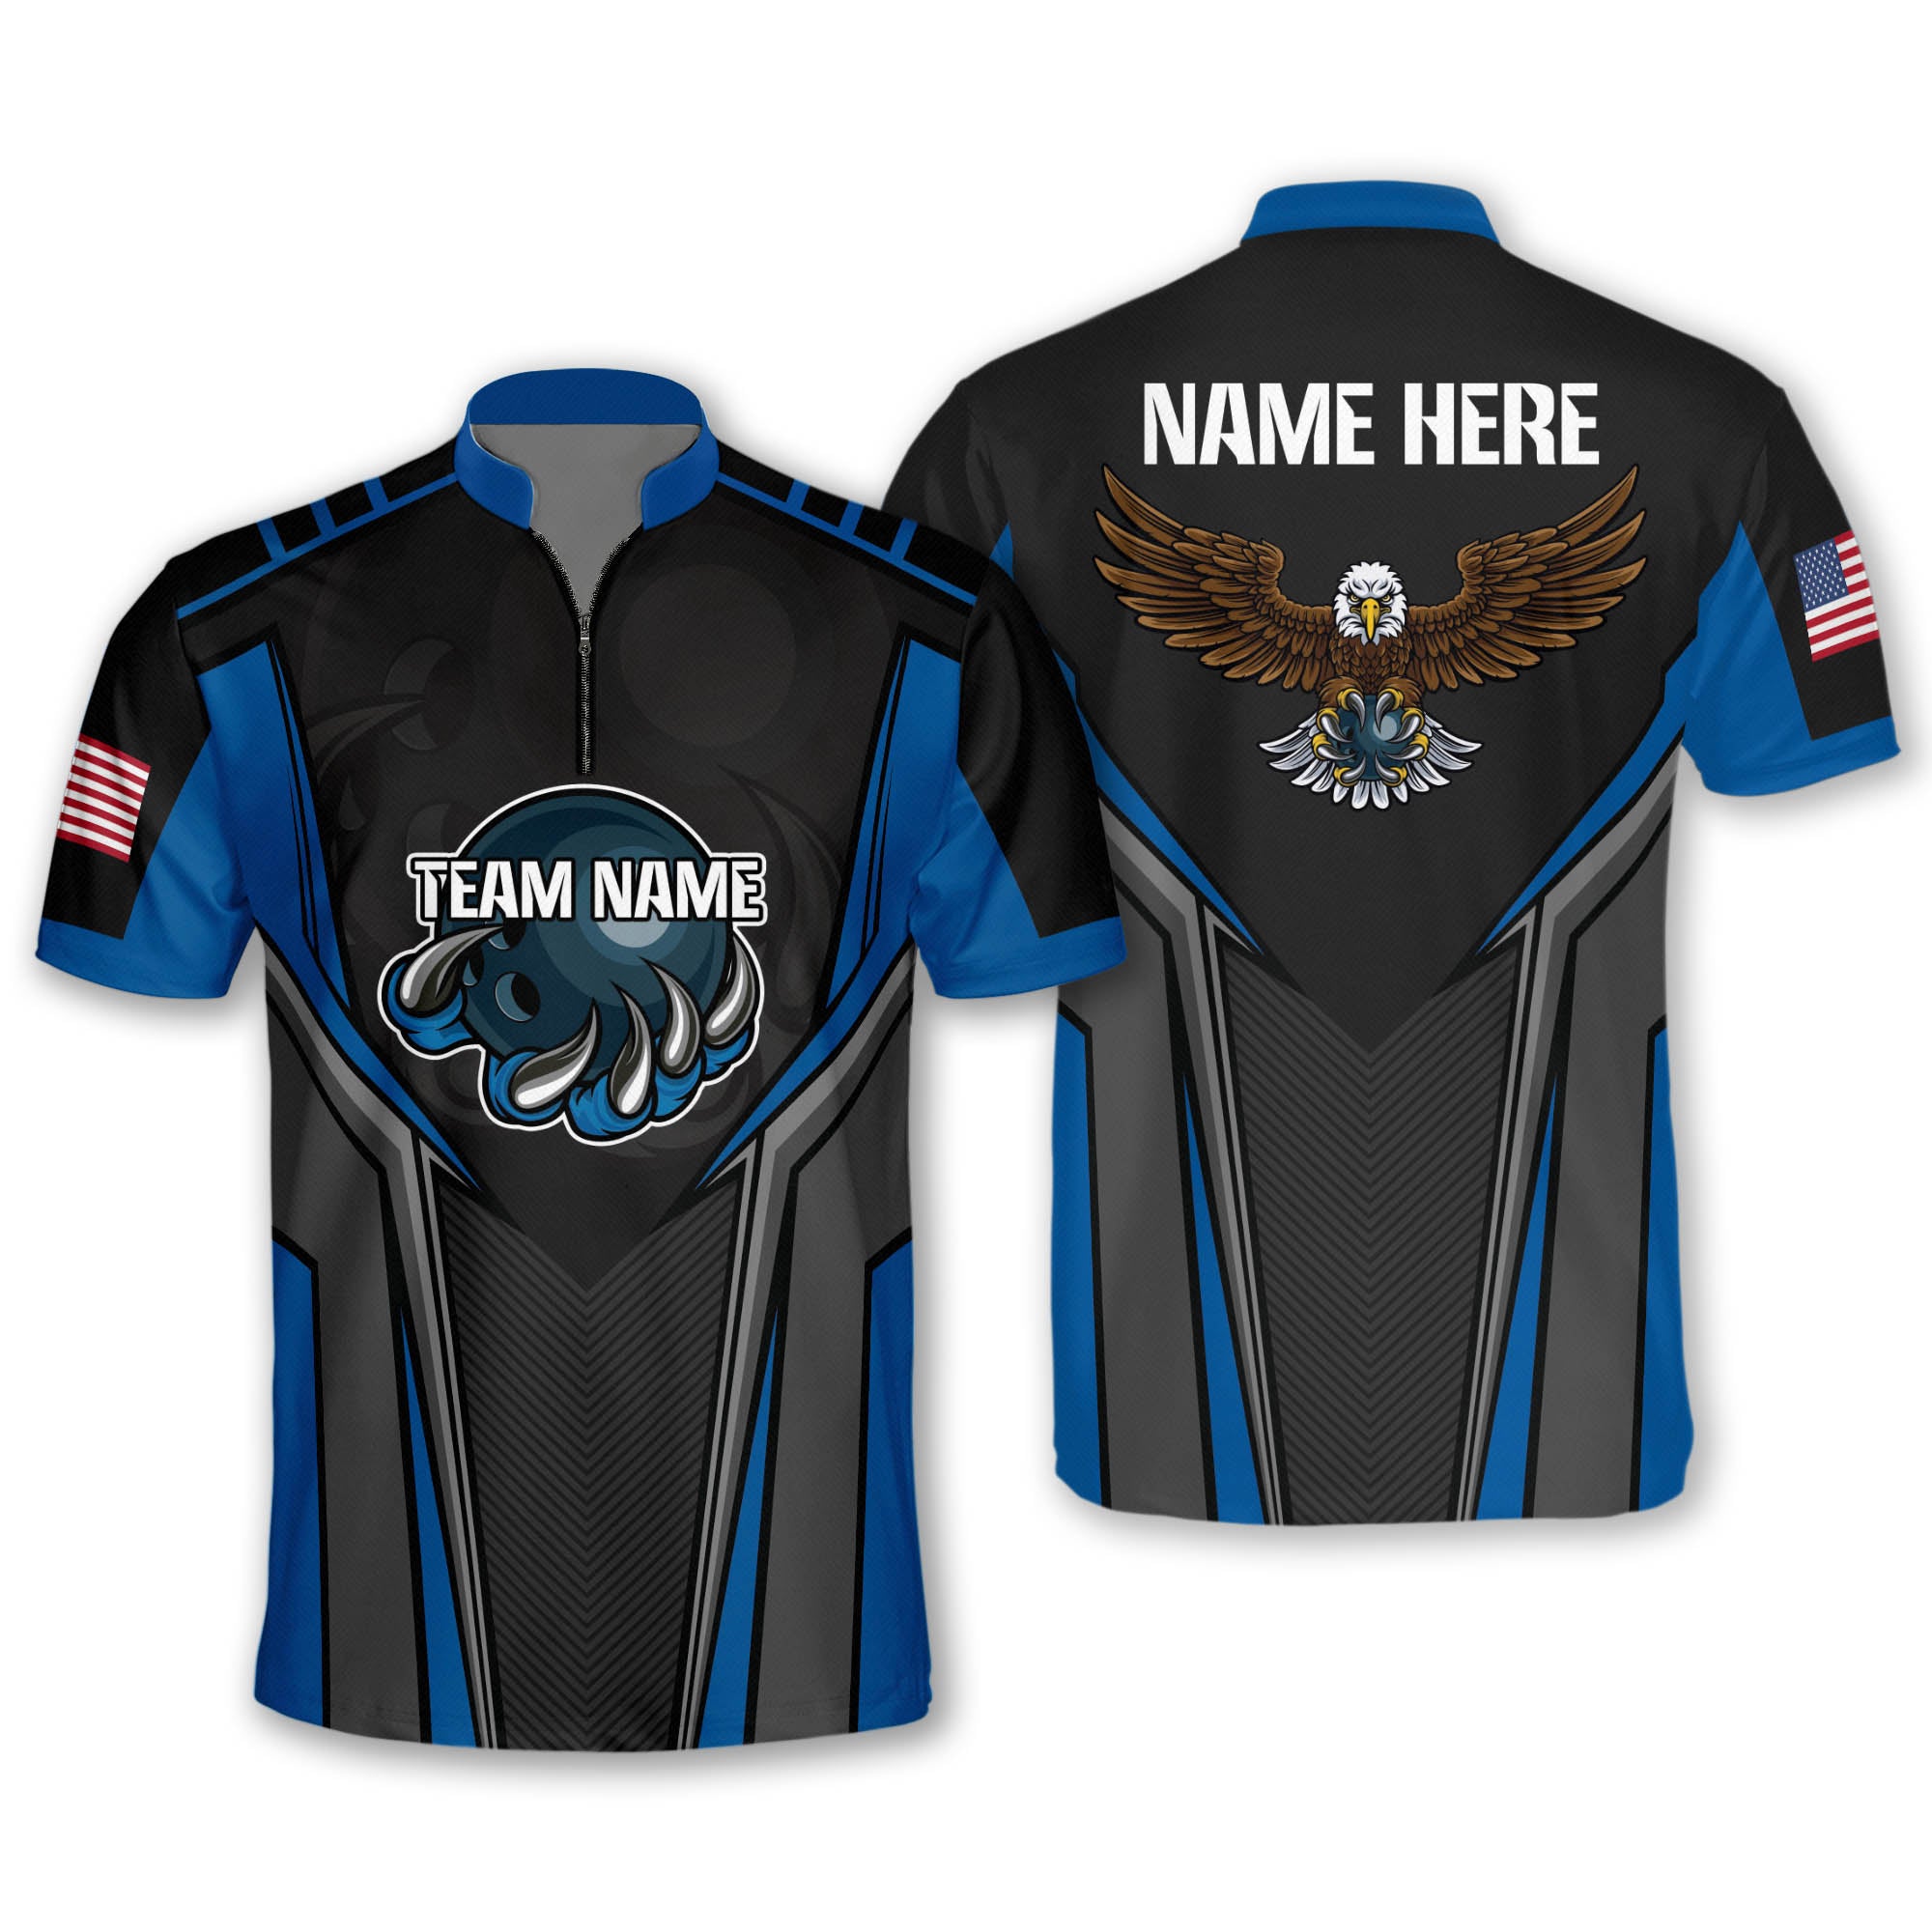 Personalized Eagle Bowling Jerseys for Men/ Best Gift for Bowler